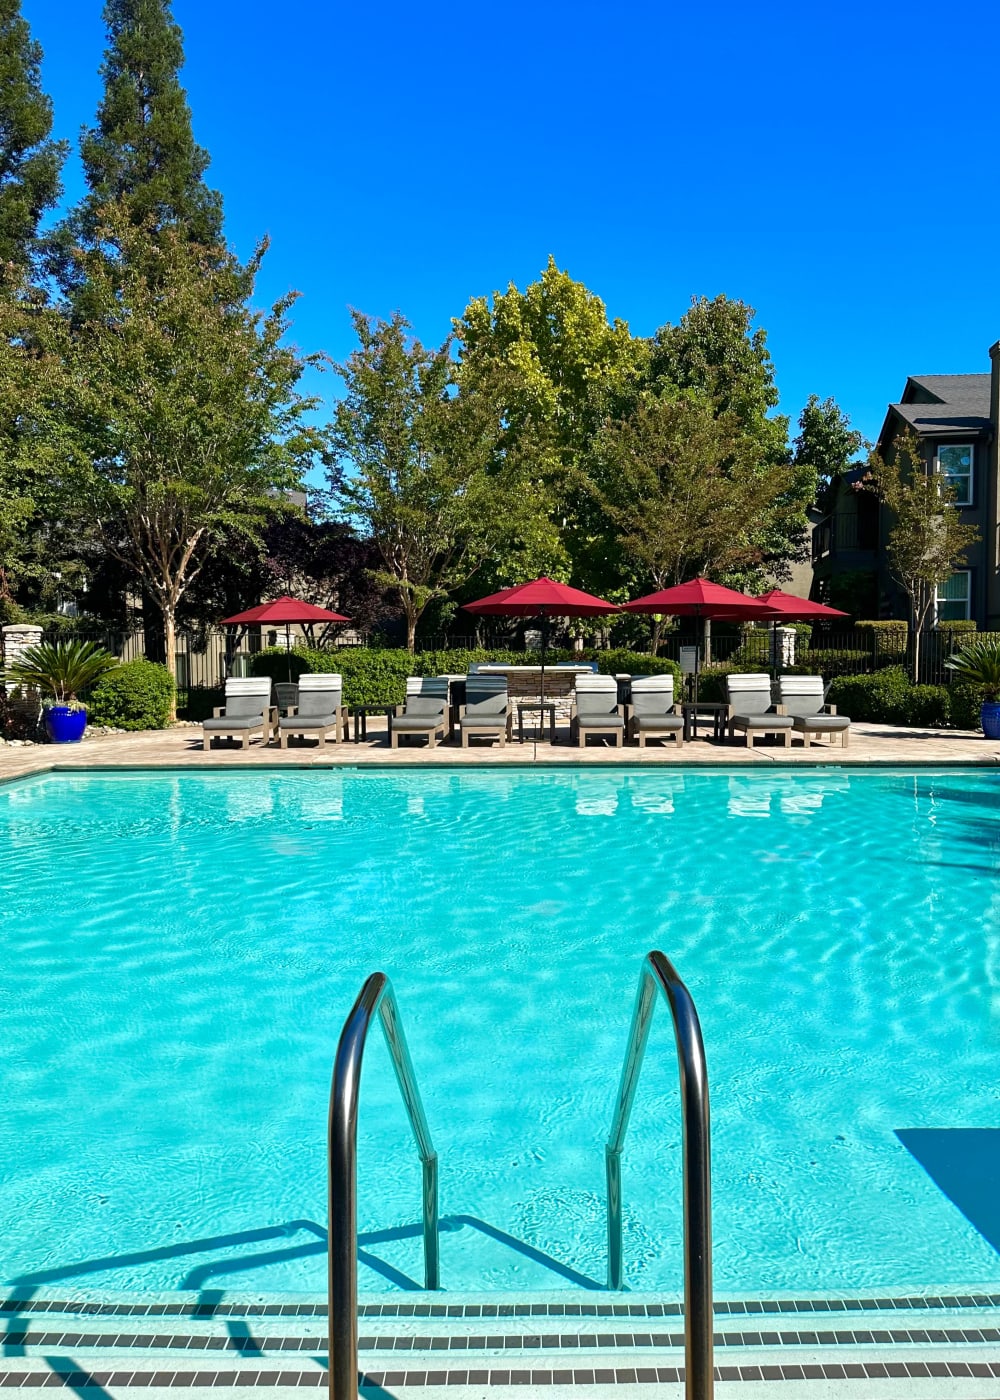 Swimming pool at The Preserve at Creekside in Roseville, California